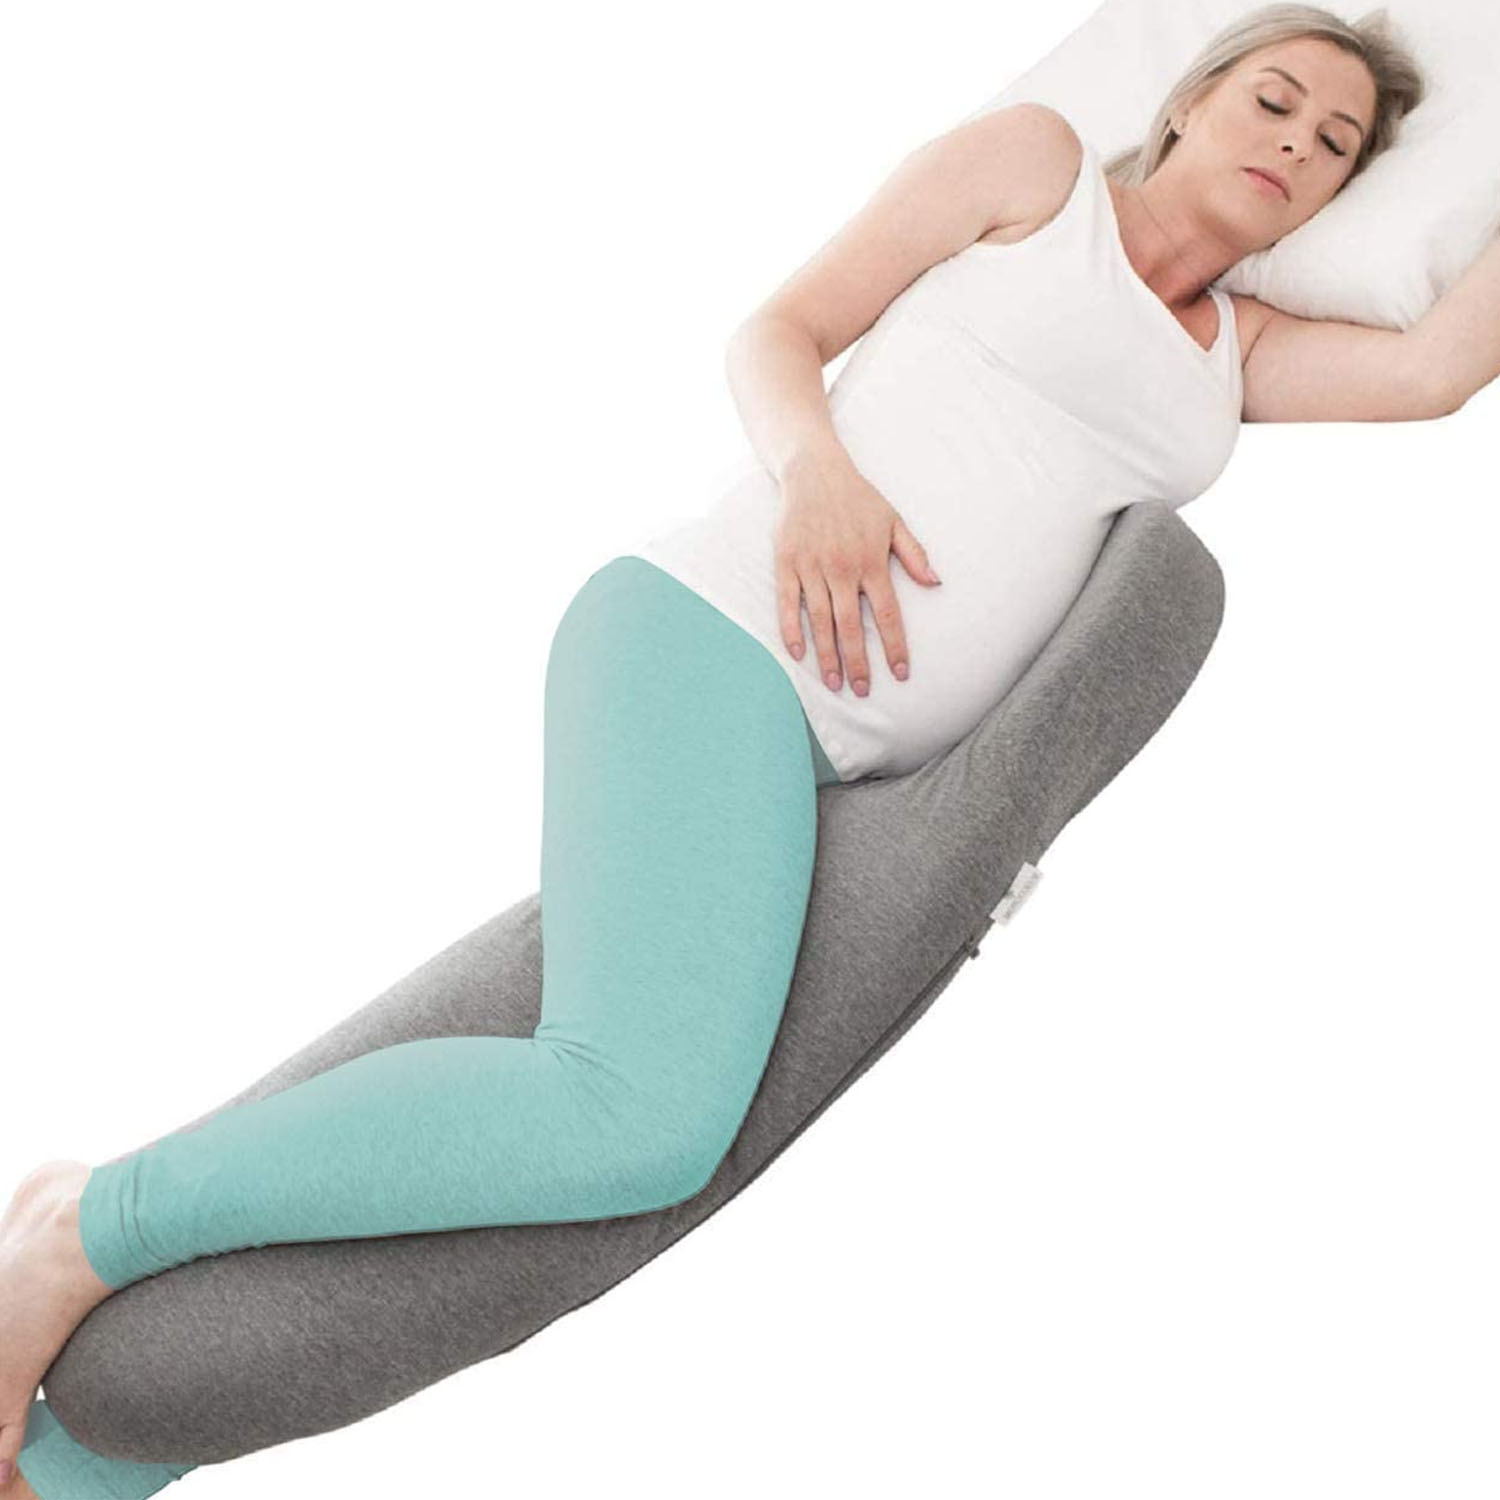 Pillows with wedges to support your belly